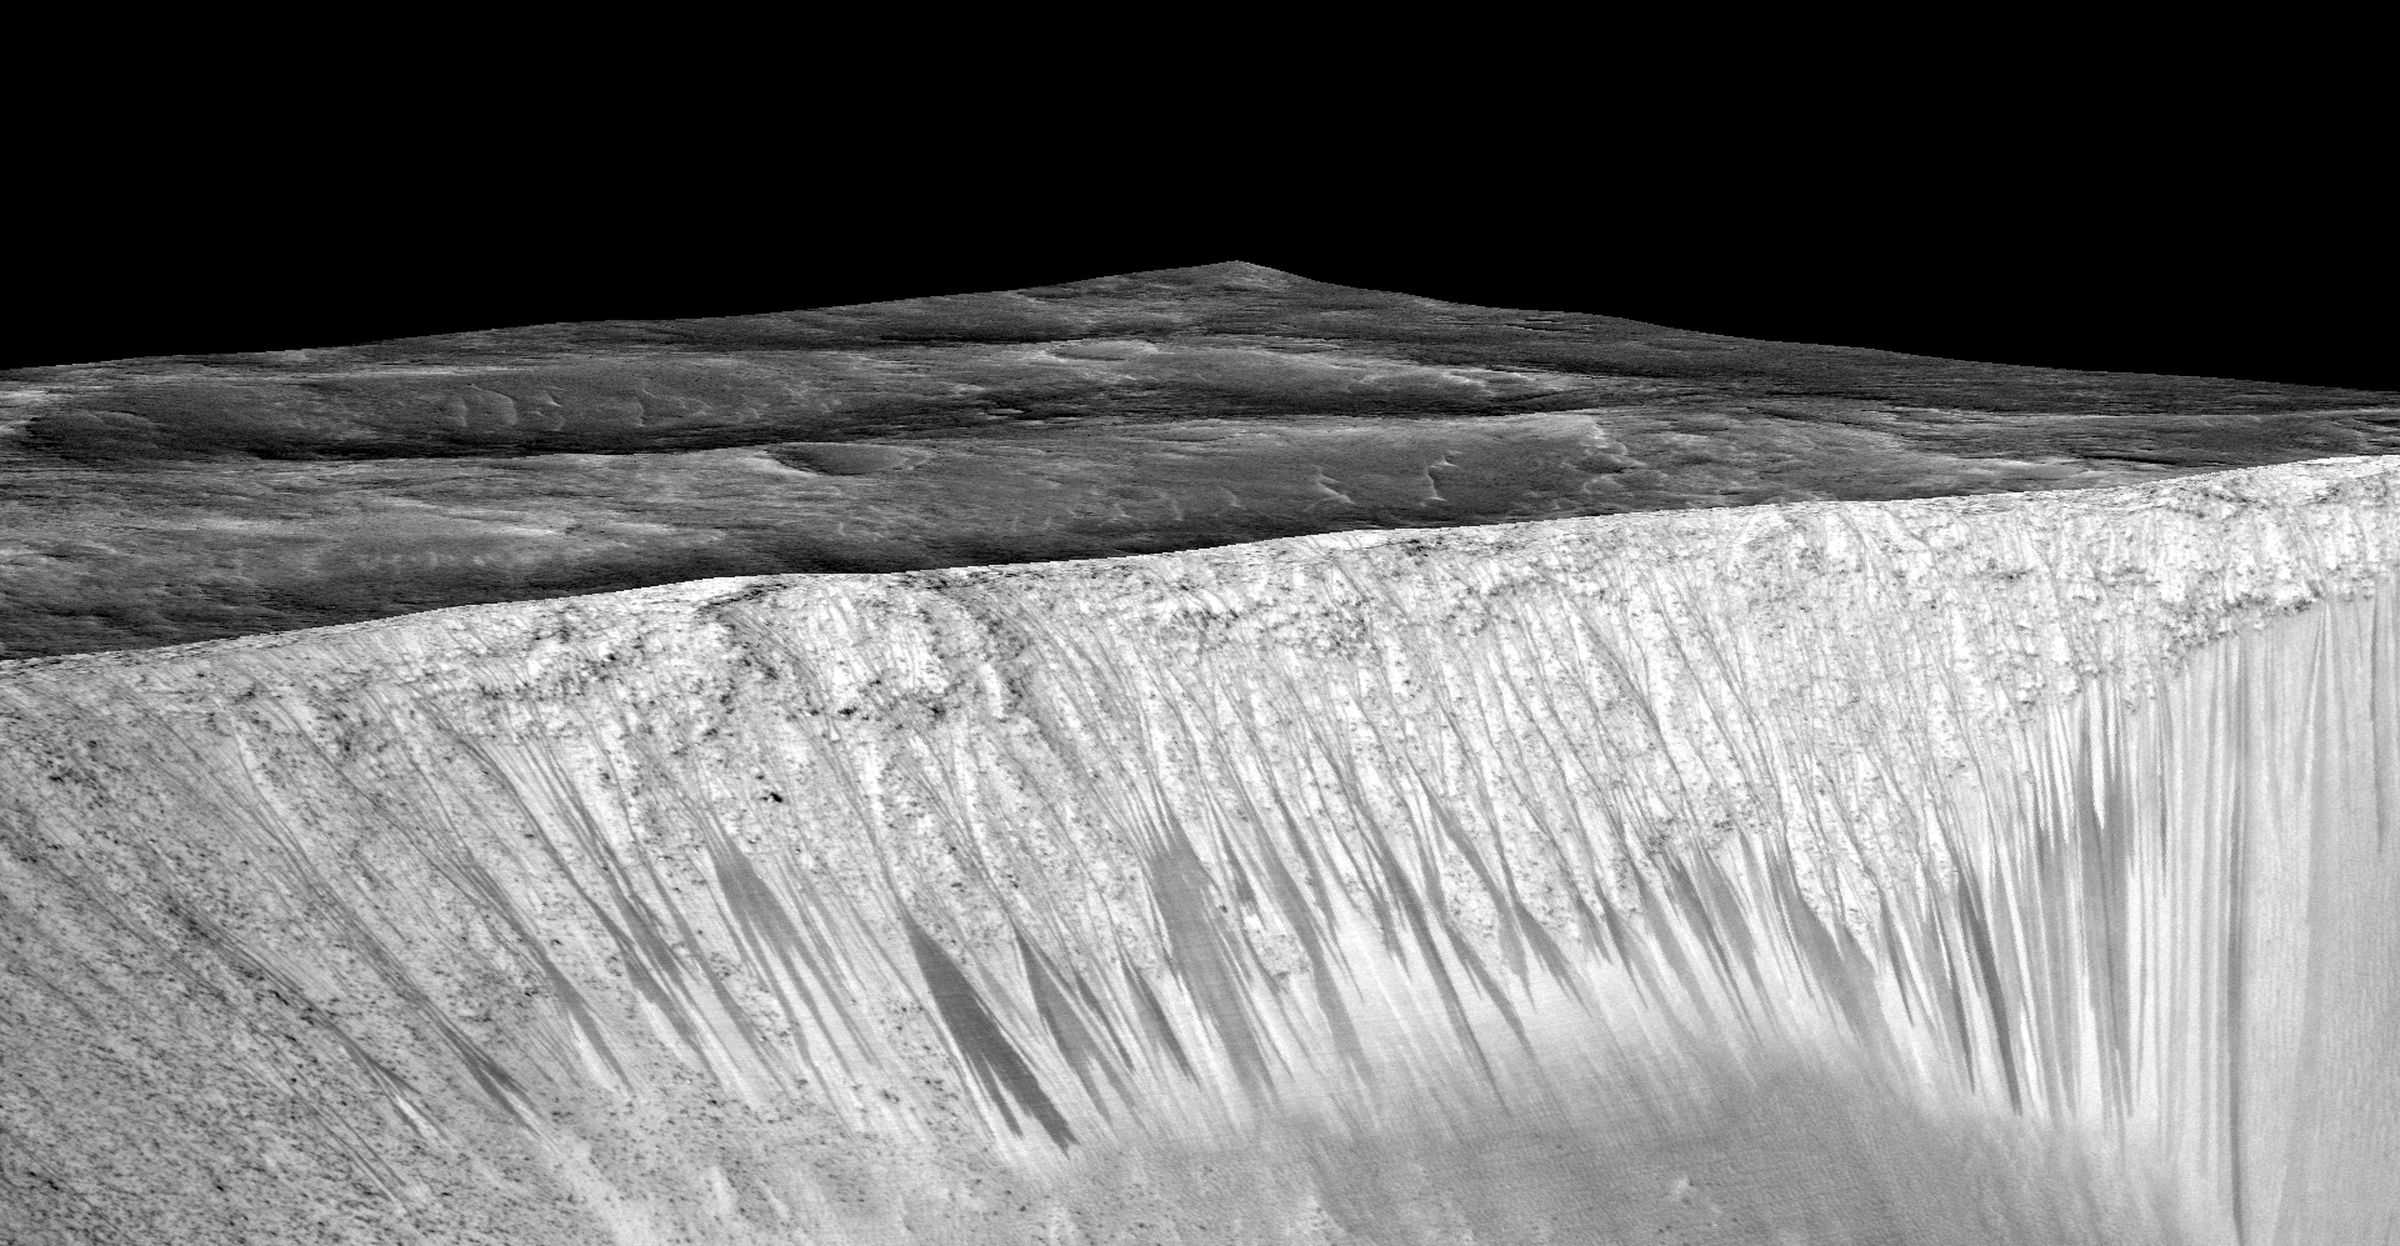 Recurring slope lineae on the walls of Garni Crater on Mars.